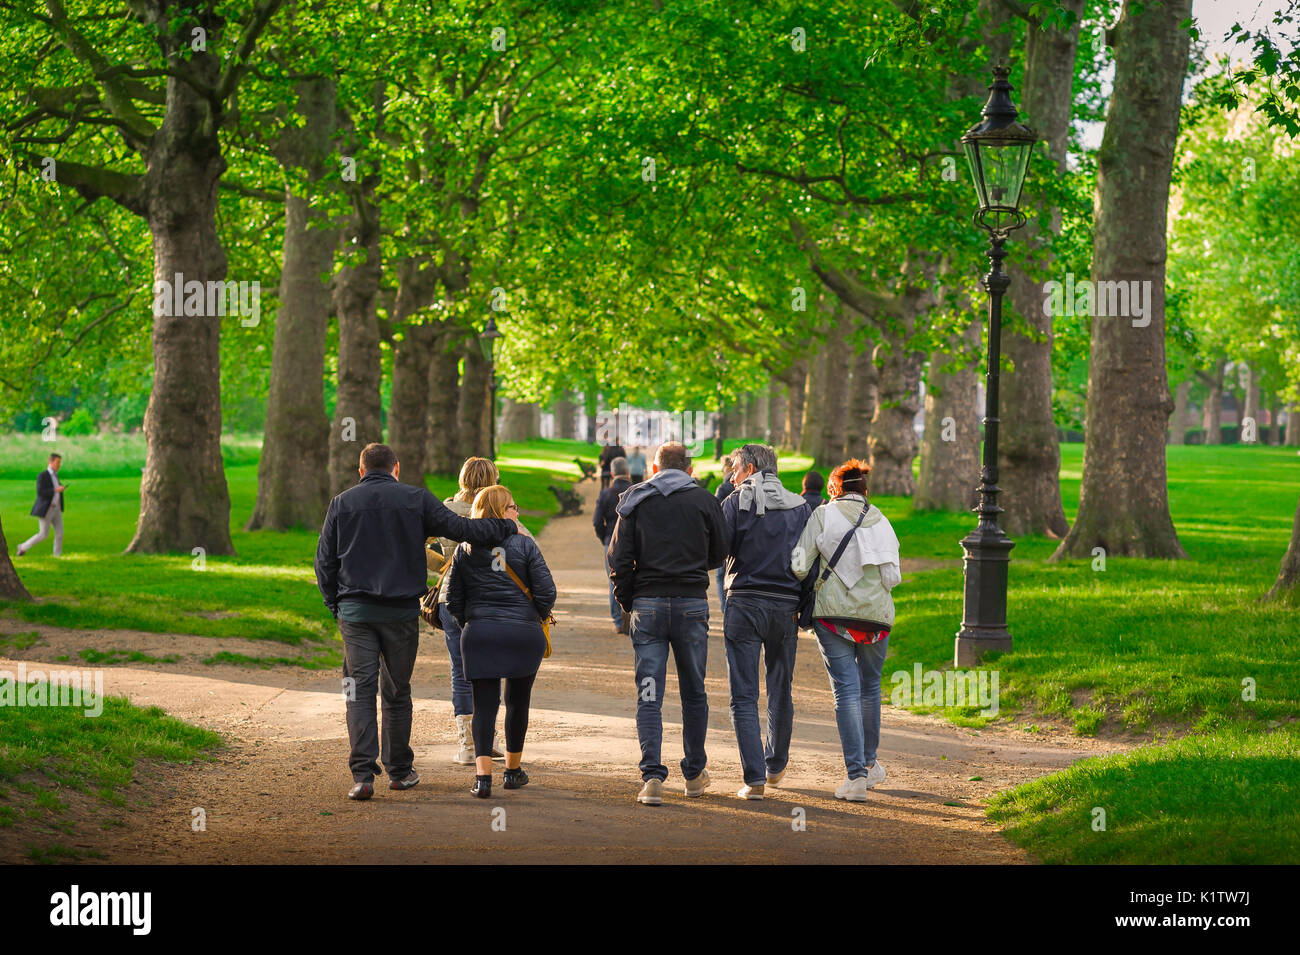 Friends together walking, view of a group of middle aged friends strolling through Green Park in central London on a summer afternoon, England, UK. Stock Photo